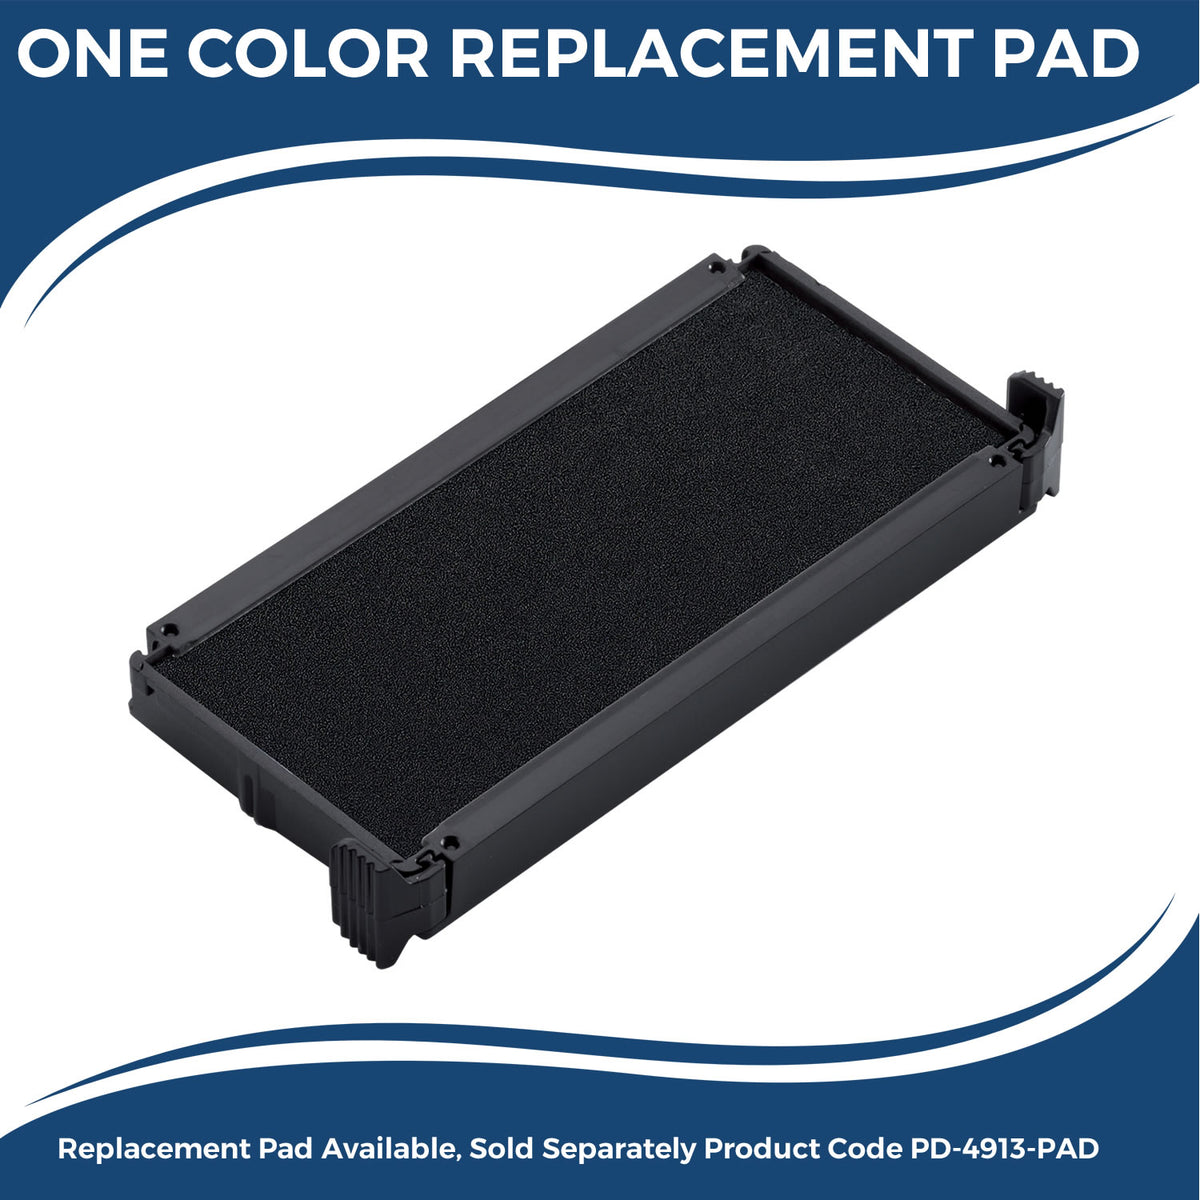 Large Self-Inking Extra Credit Stamp 5627S Large Replacment Pad